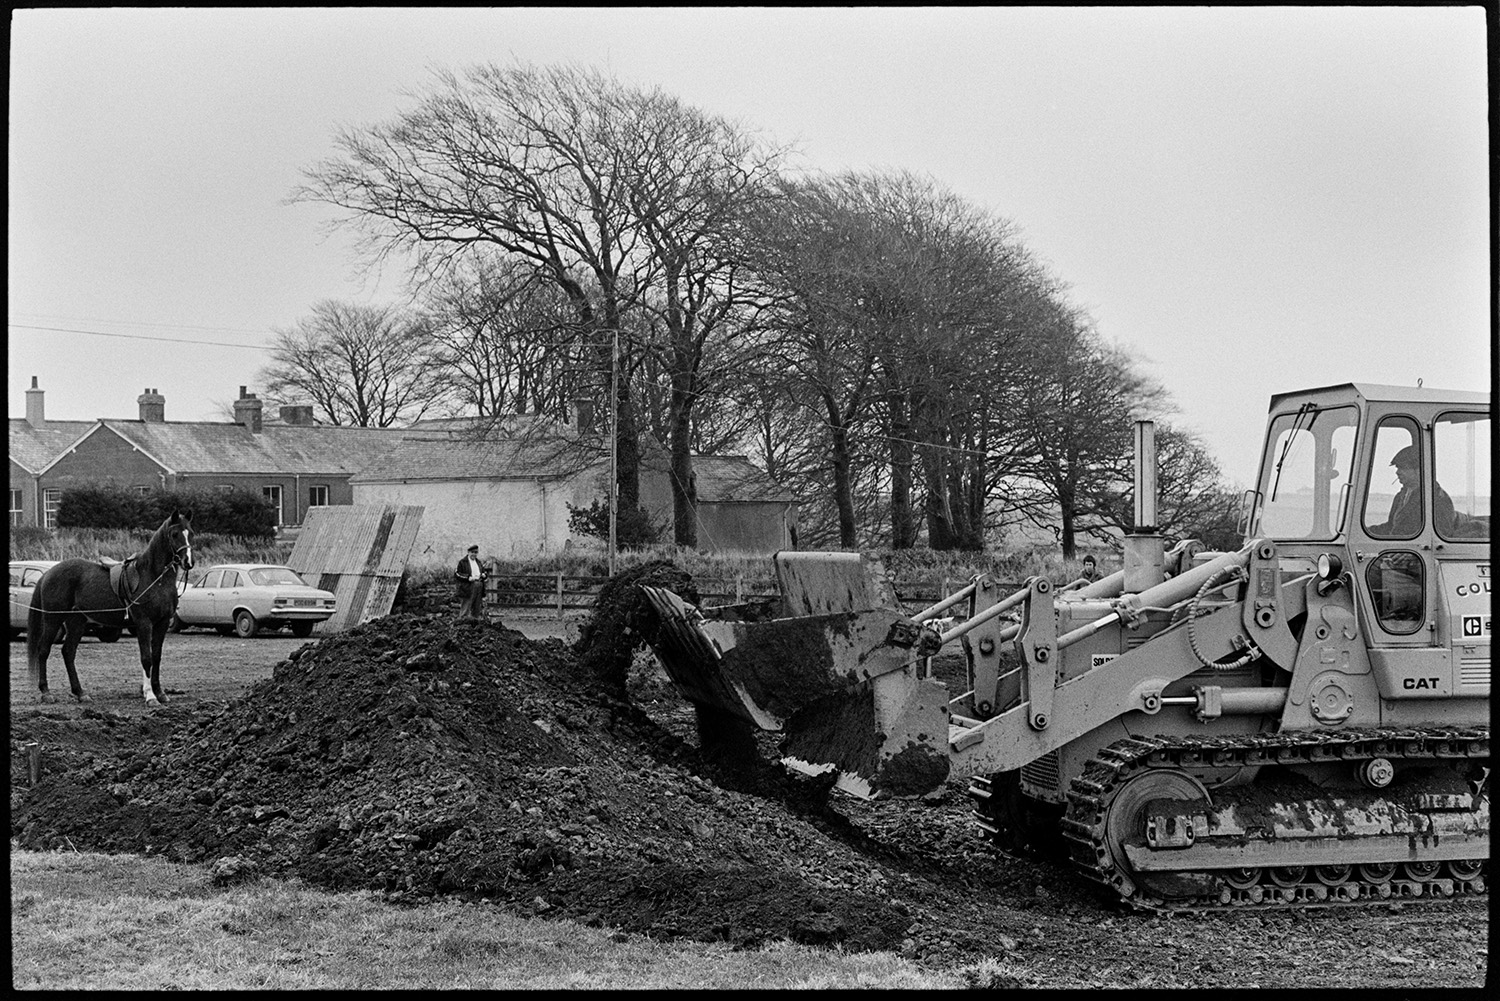 Man training horse getting it to tolerate bulldozer noise. New village hall foundations. 
[A bulldozer digging foundations for the new village hall in Beaford. A horse is visible in the background which is being trained by Henry Bright to get used to bulldozer noise.]